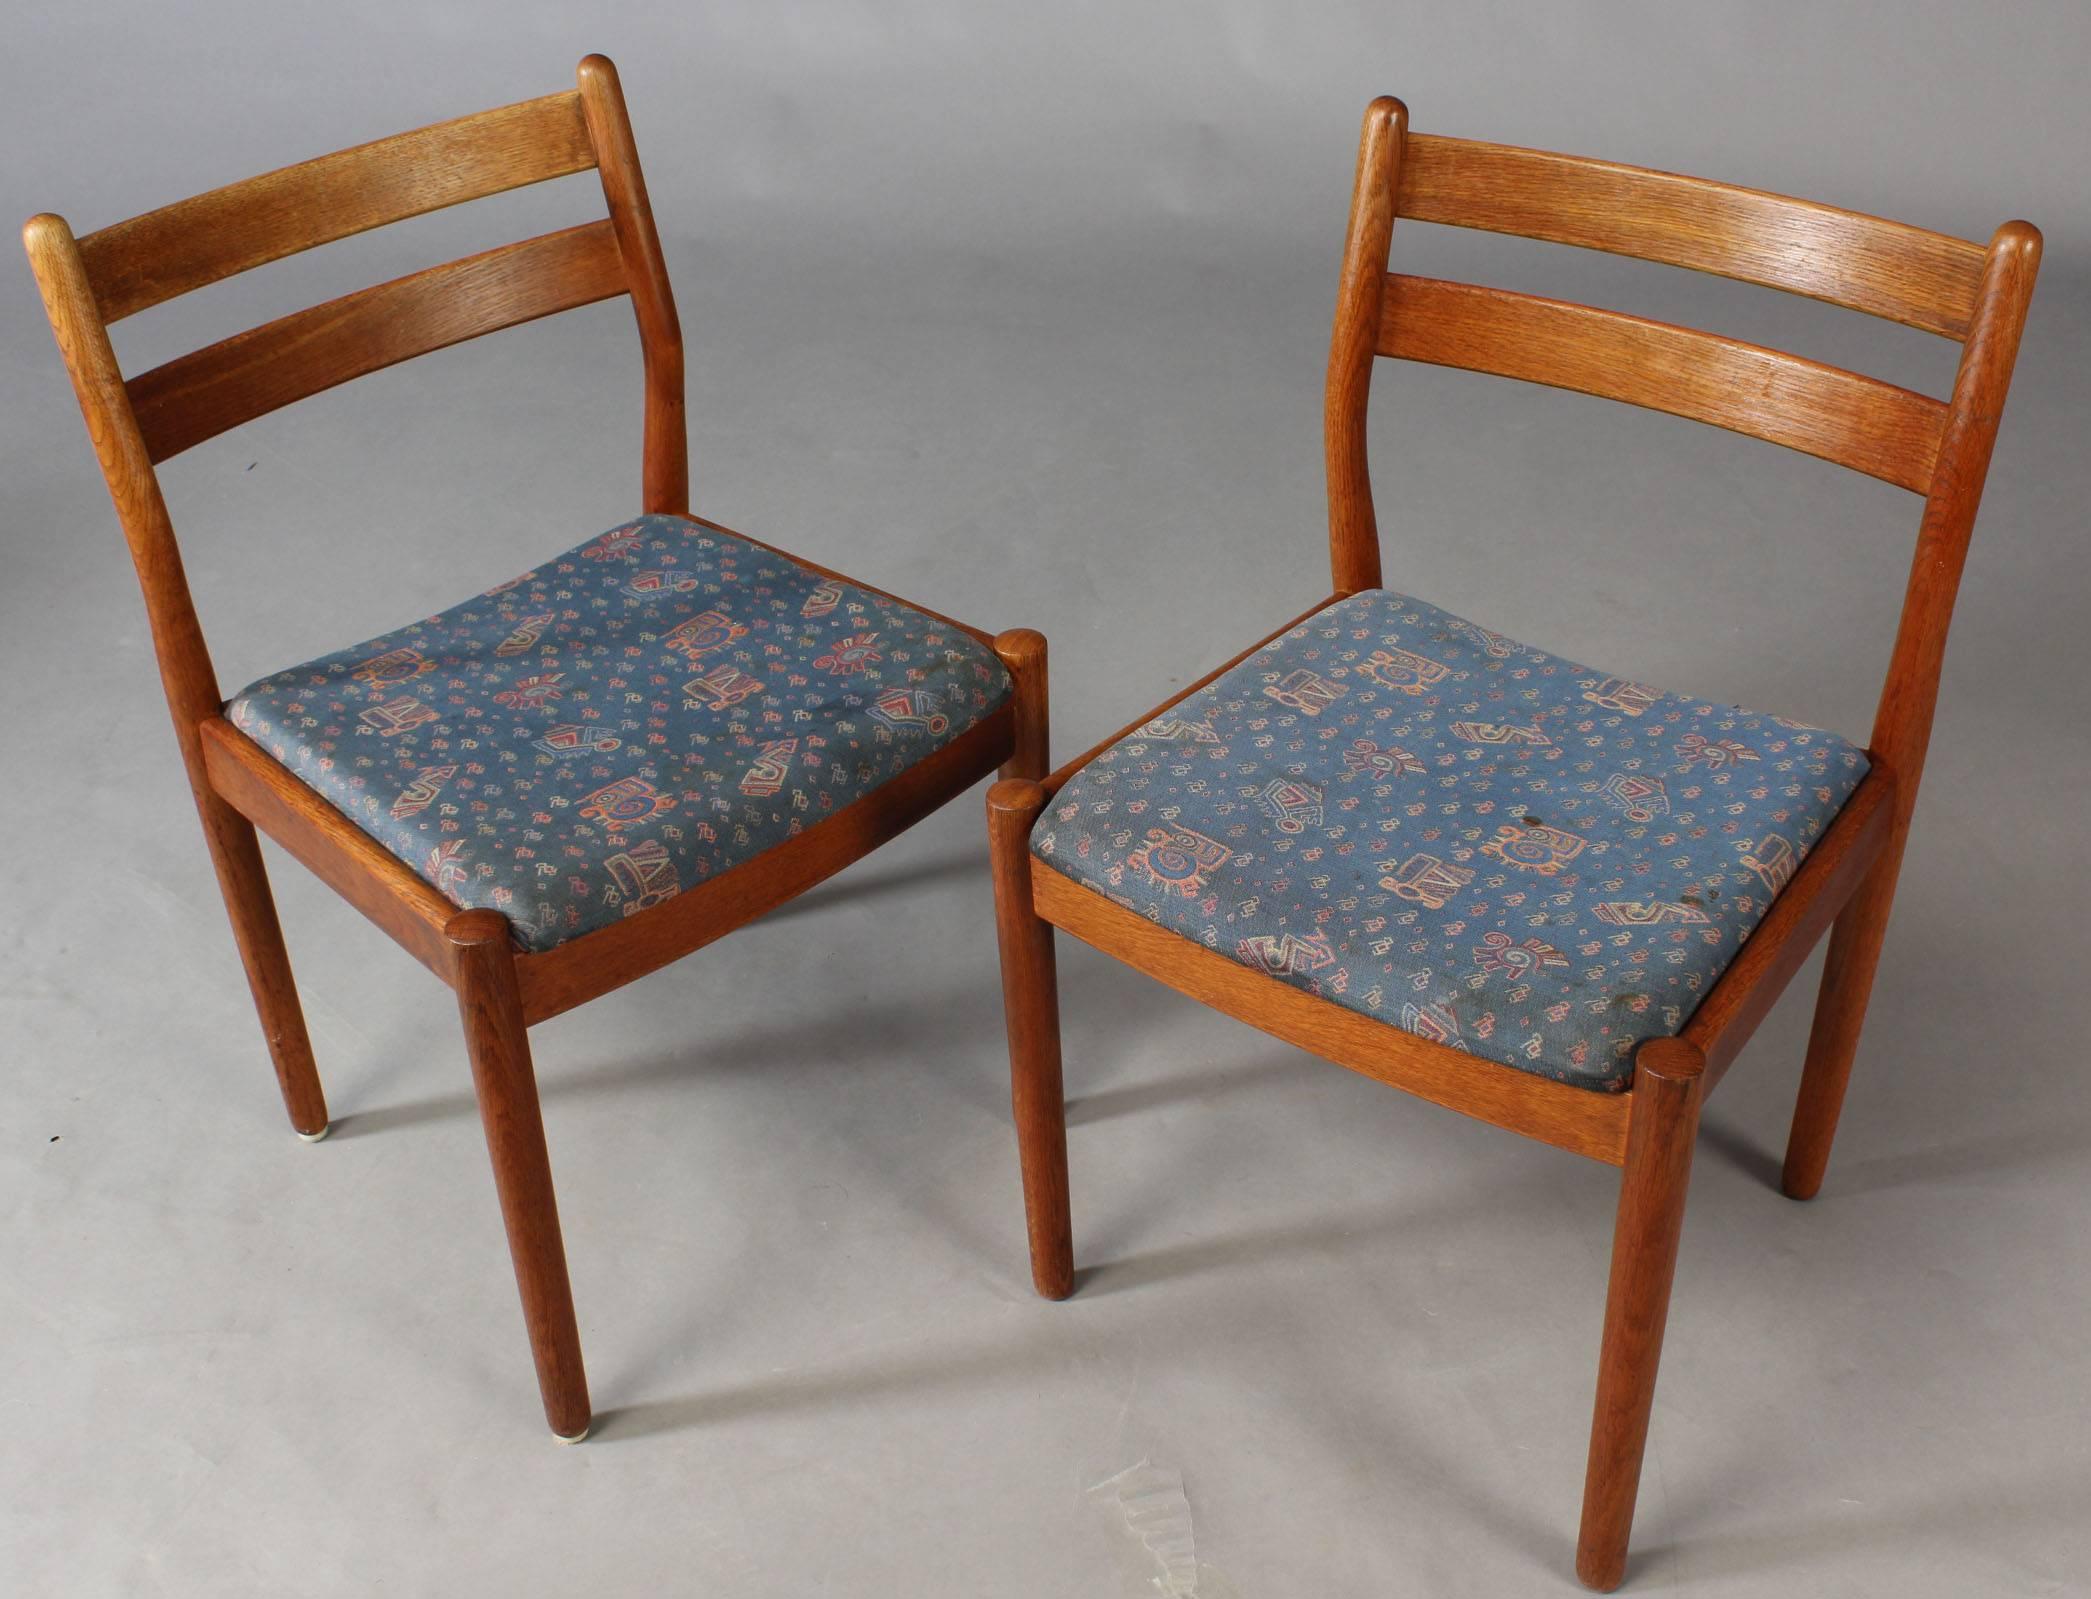 Set of four model J61 ladder back Danish dining chairs in washed oak designed by Poul Volther for Sorø Stolefabrik.

The frames of the chairs have been overlooked by cabinetmaker and are in very good condition. The chairs will be reupholstered